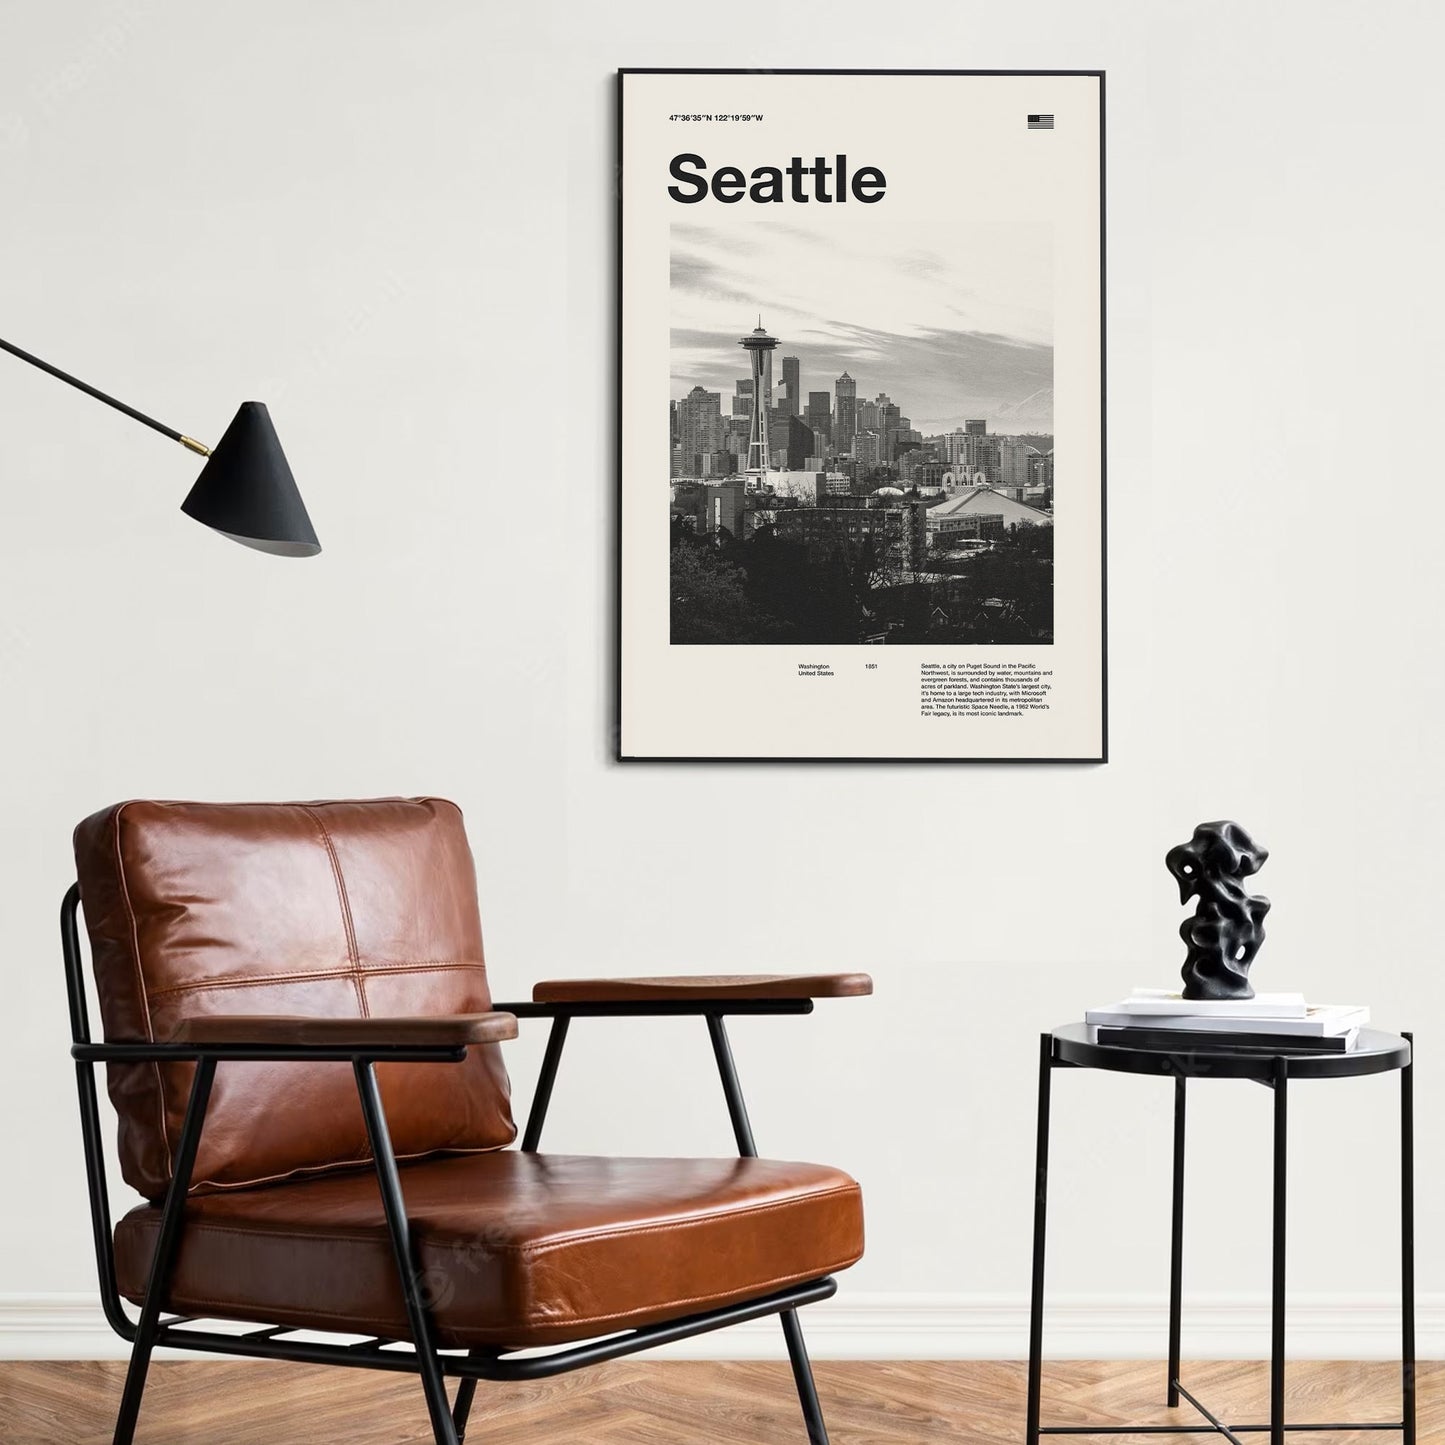 Seattle City Poster